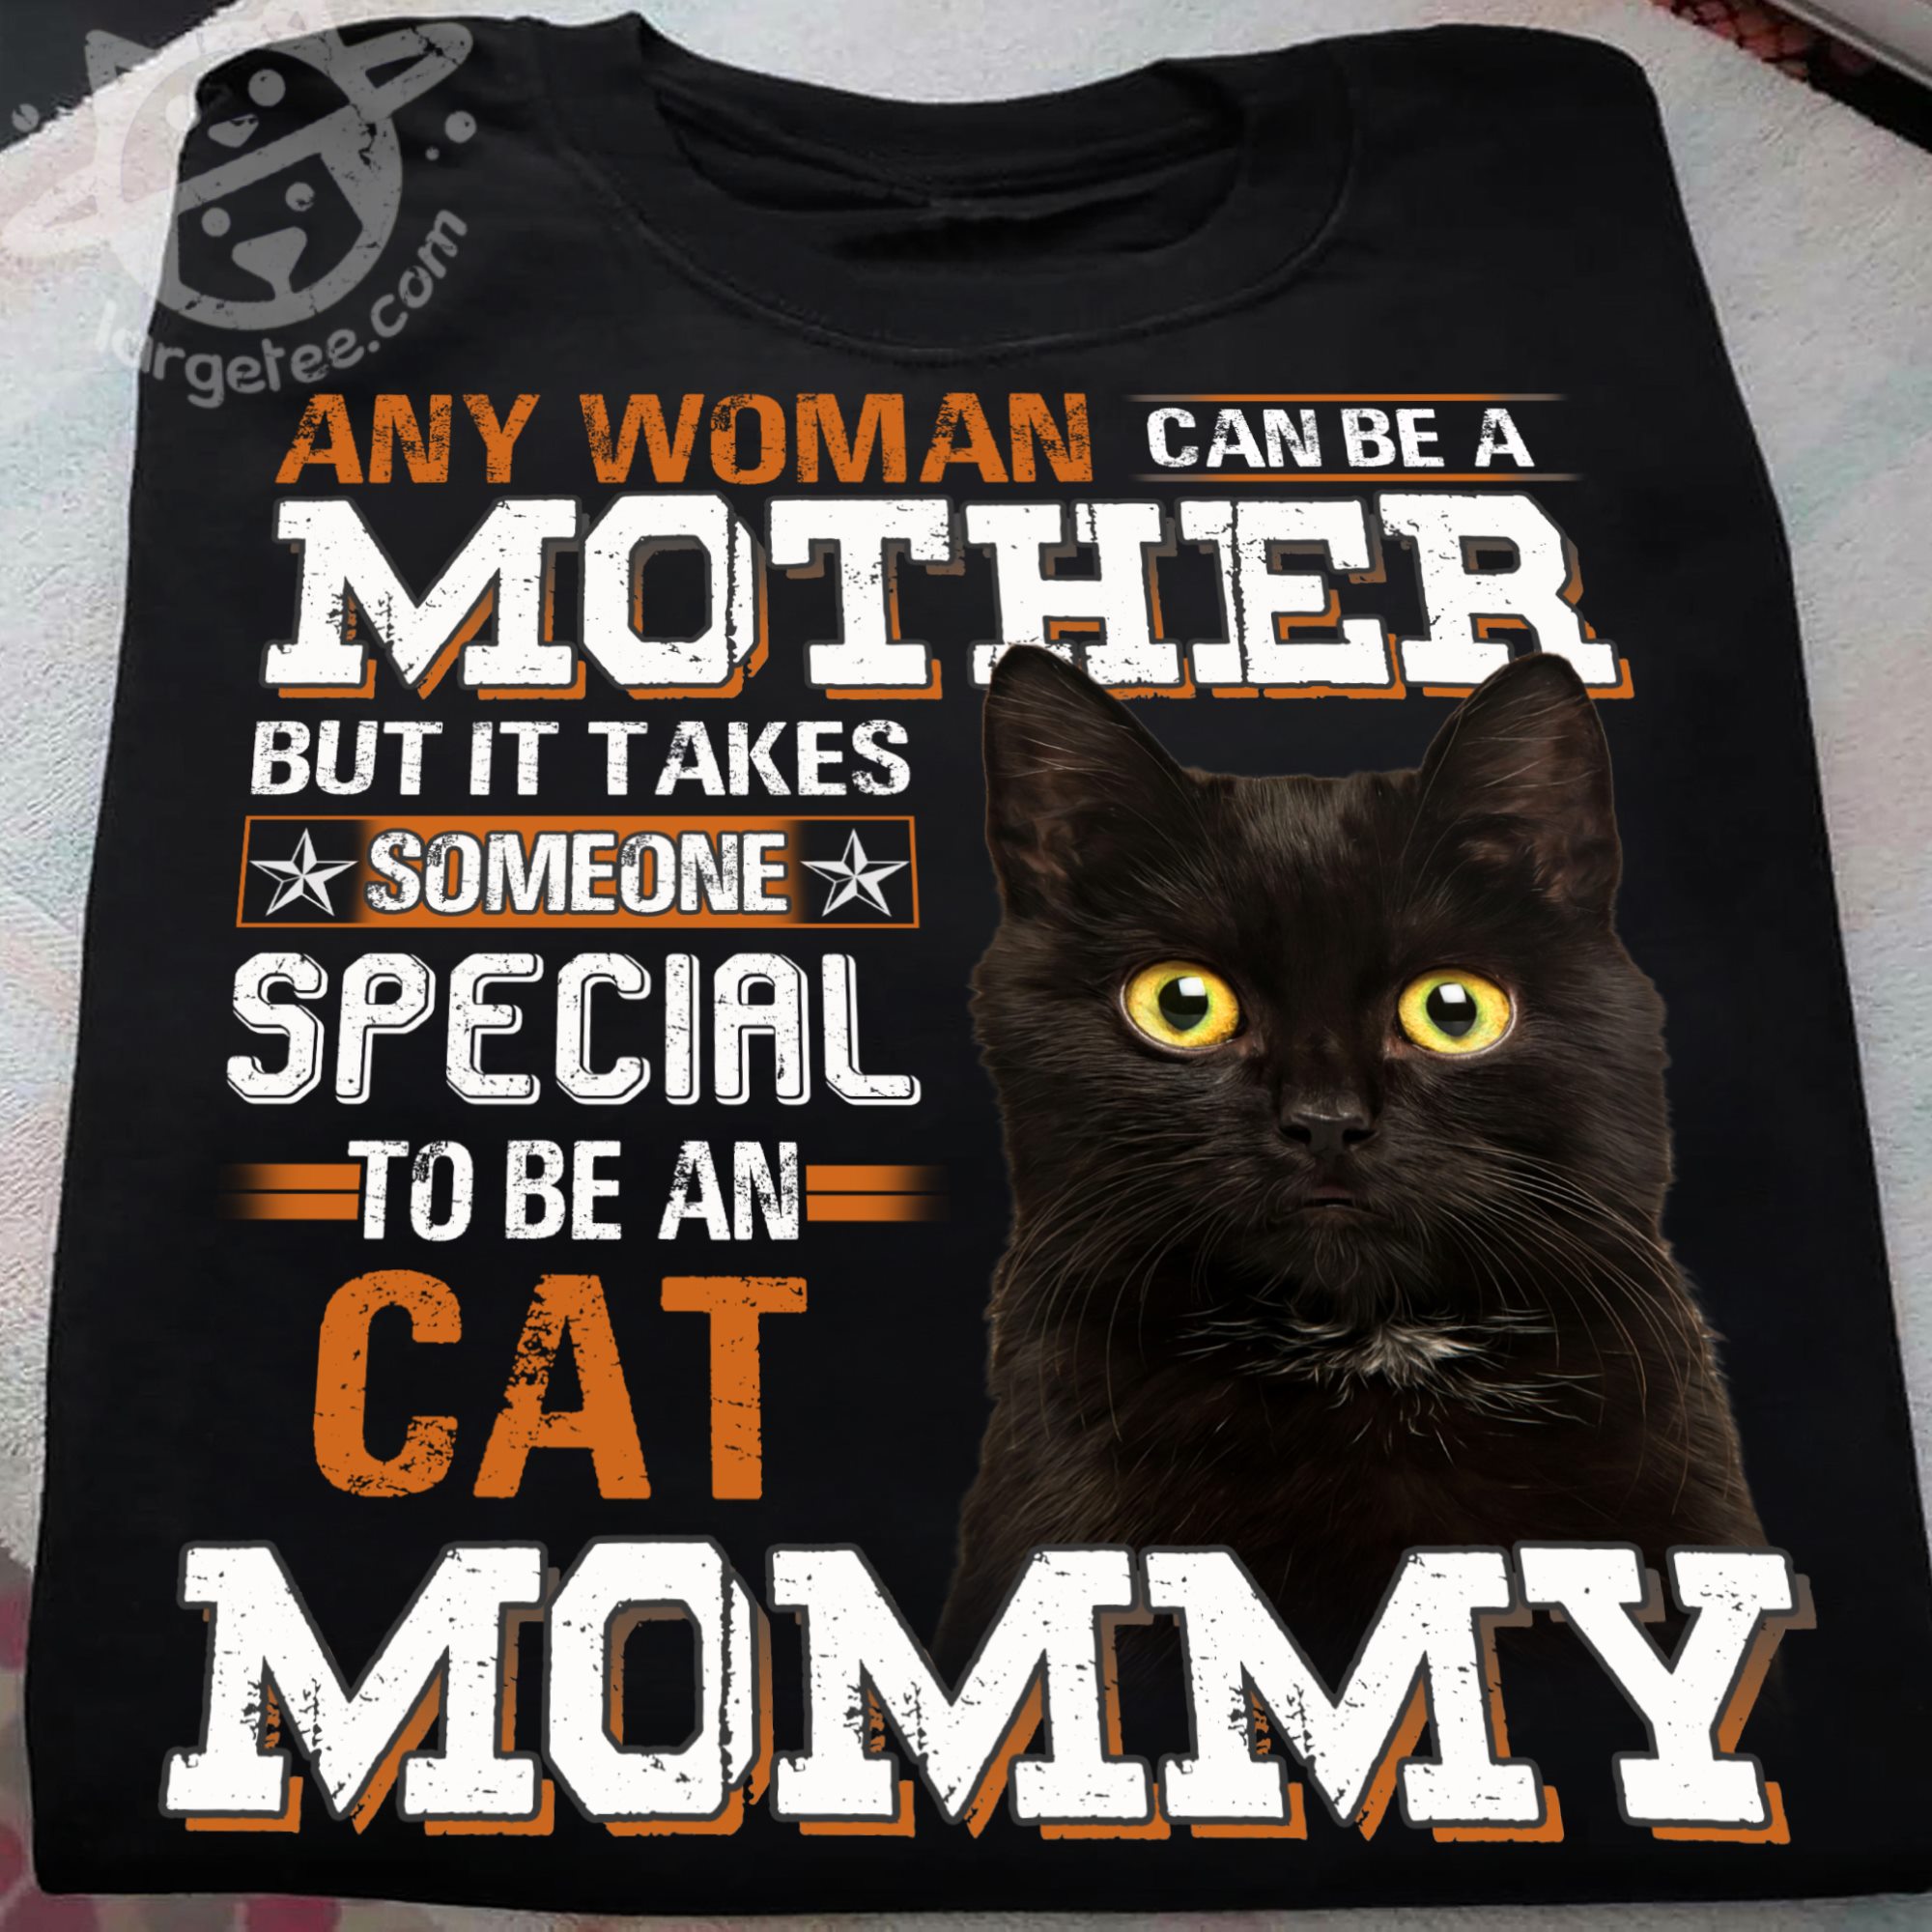 Any woman can be a mother but it takes someone special to be an cat mommy